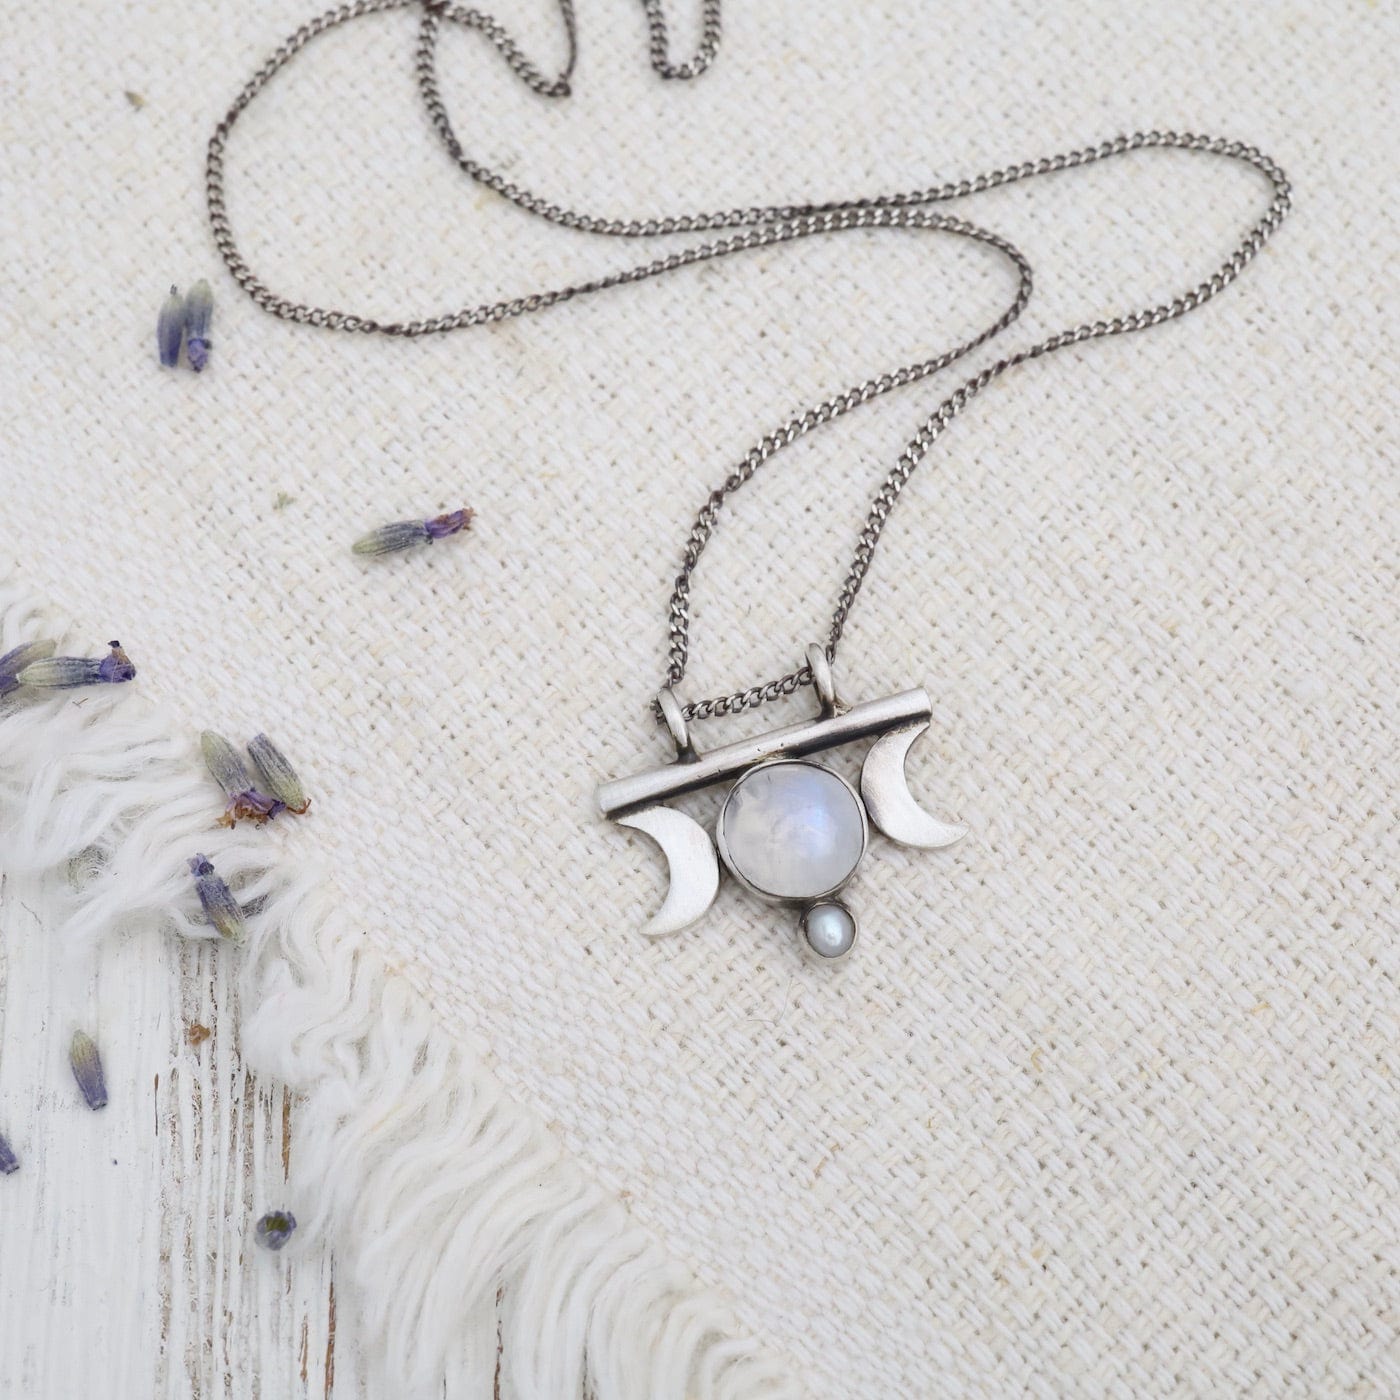 NKL Moon Goddess Amulet with Moonstone & Pearl Necklace